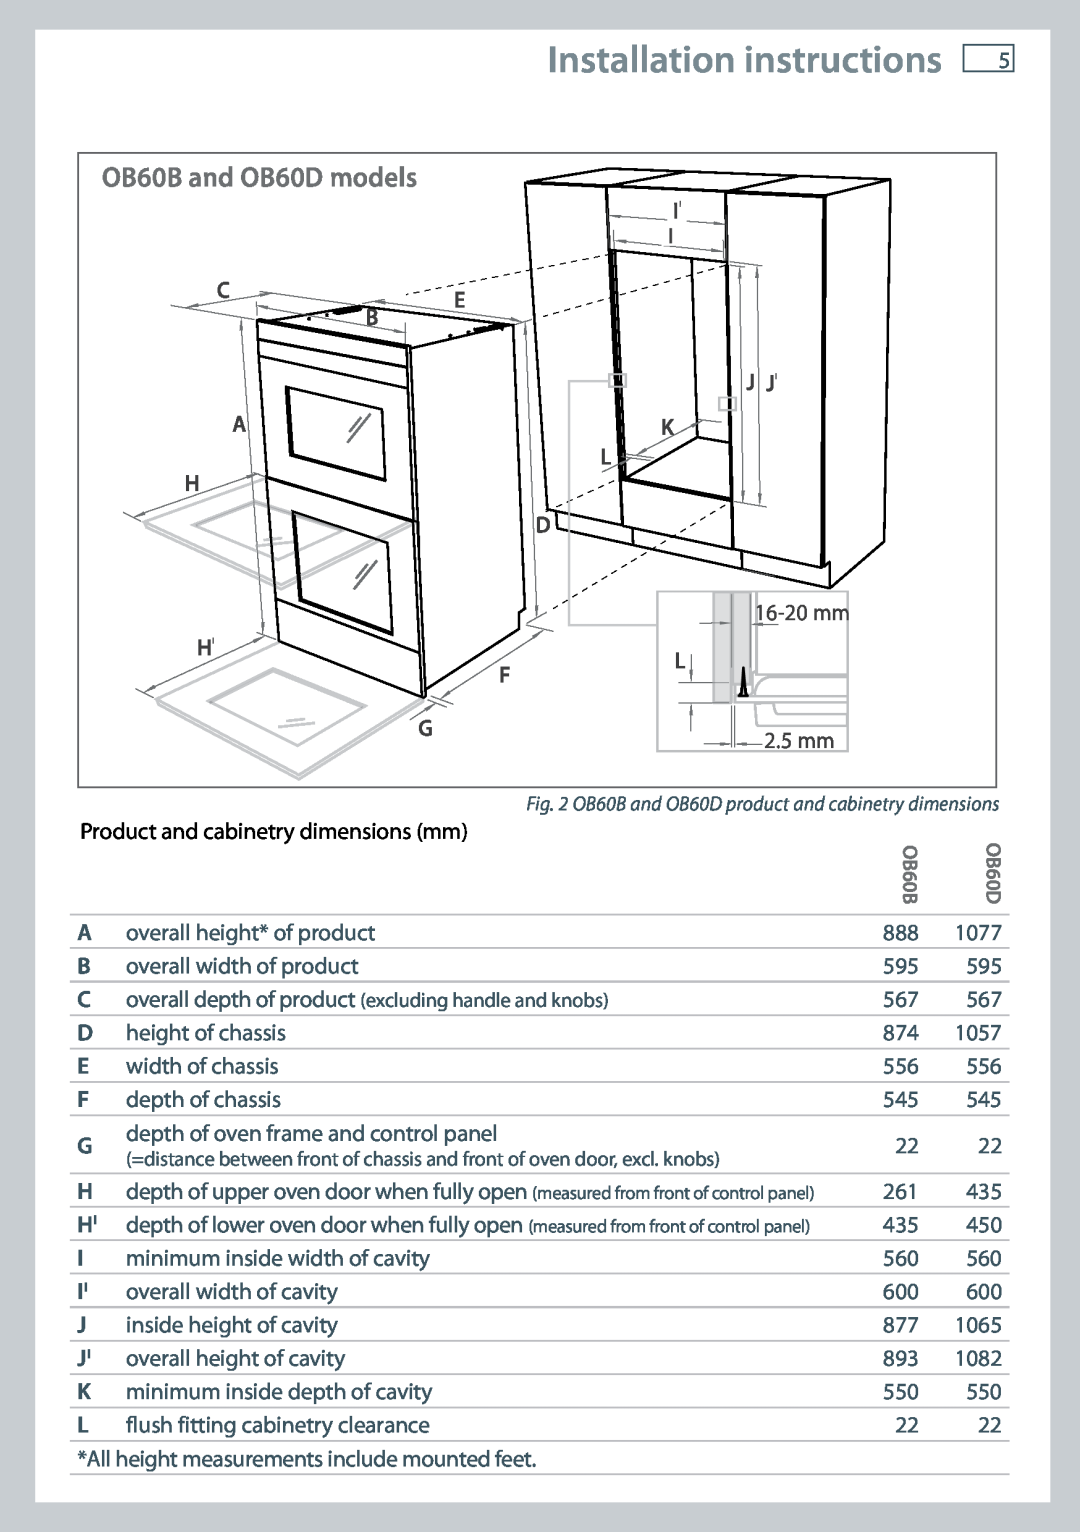 Fisher & Paykel Installation instructions, OB60B and OB60D models, Ii I C E B J Ji A K L H D, 16-20 mm 